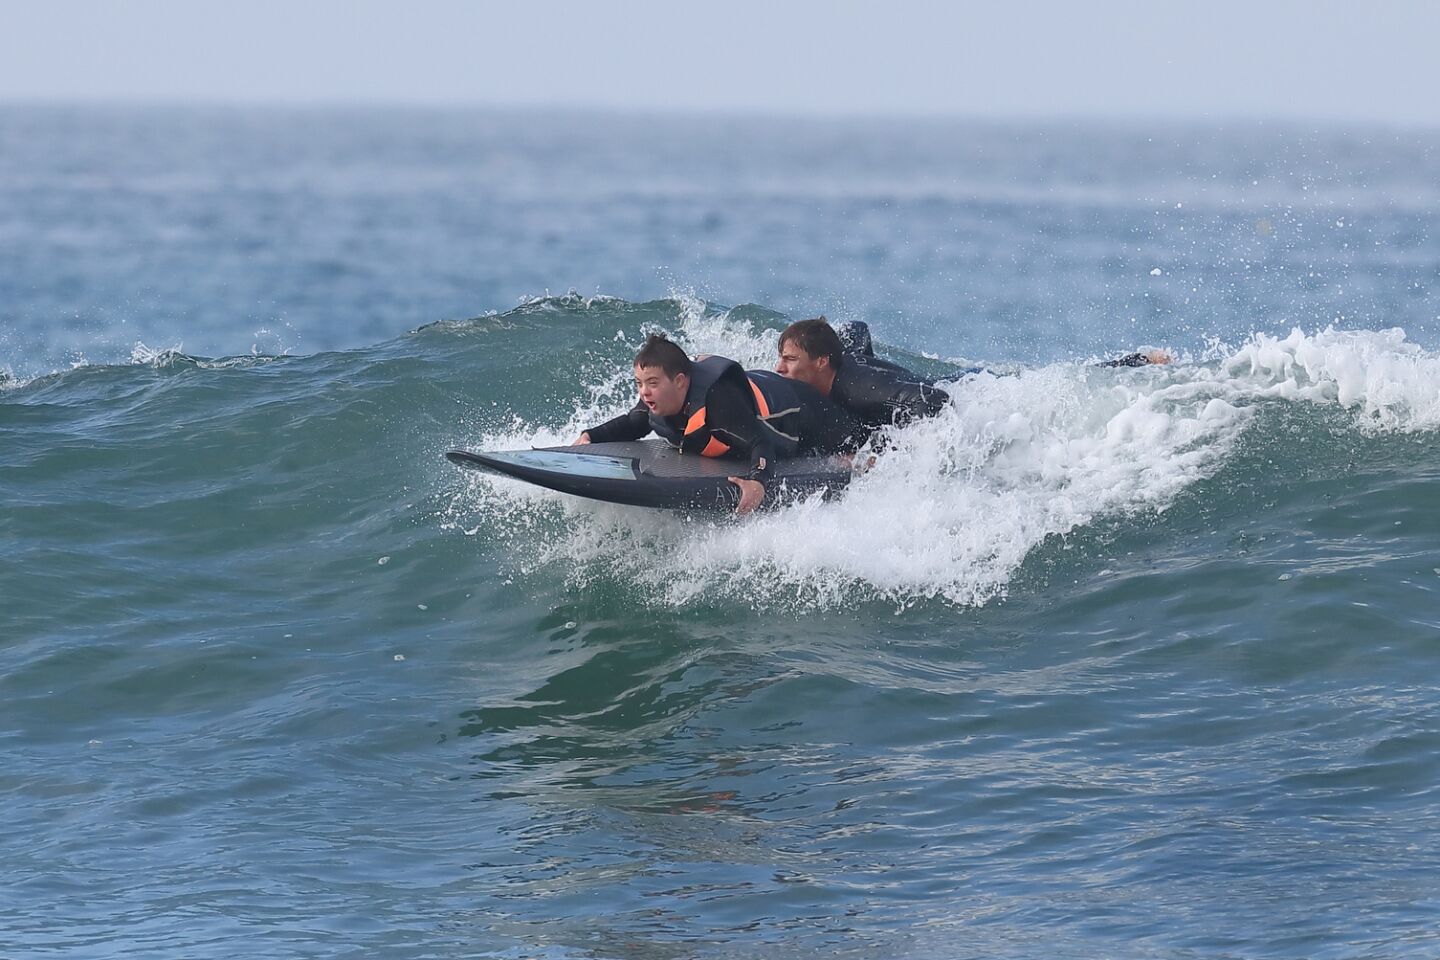 Surf students and instructors had a great day on the waves